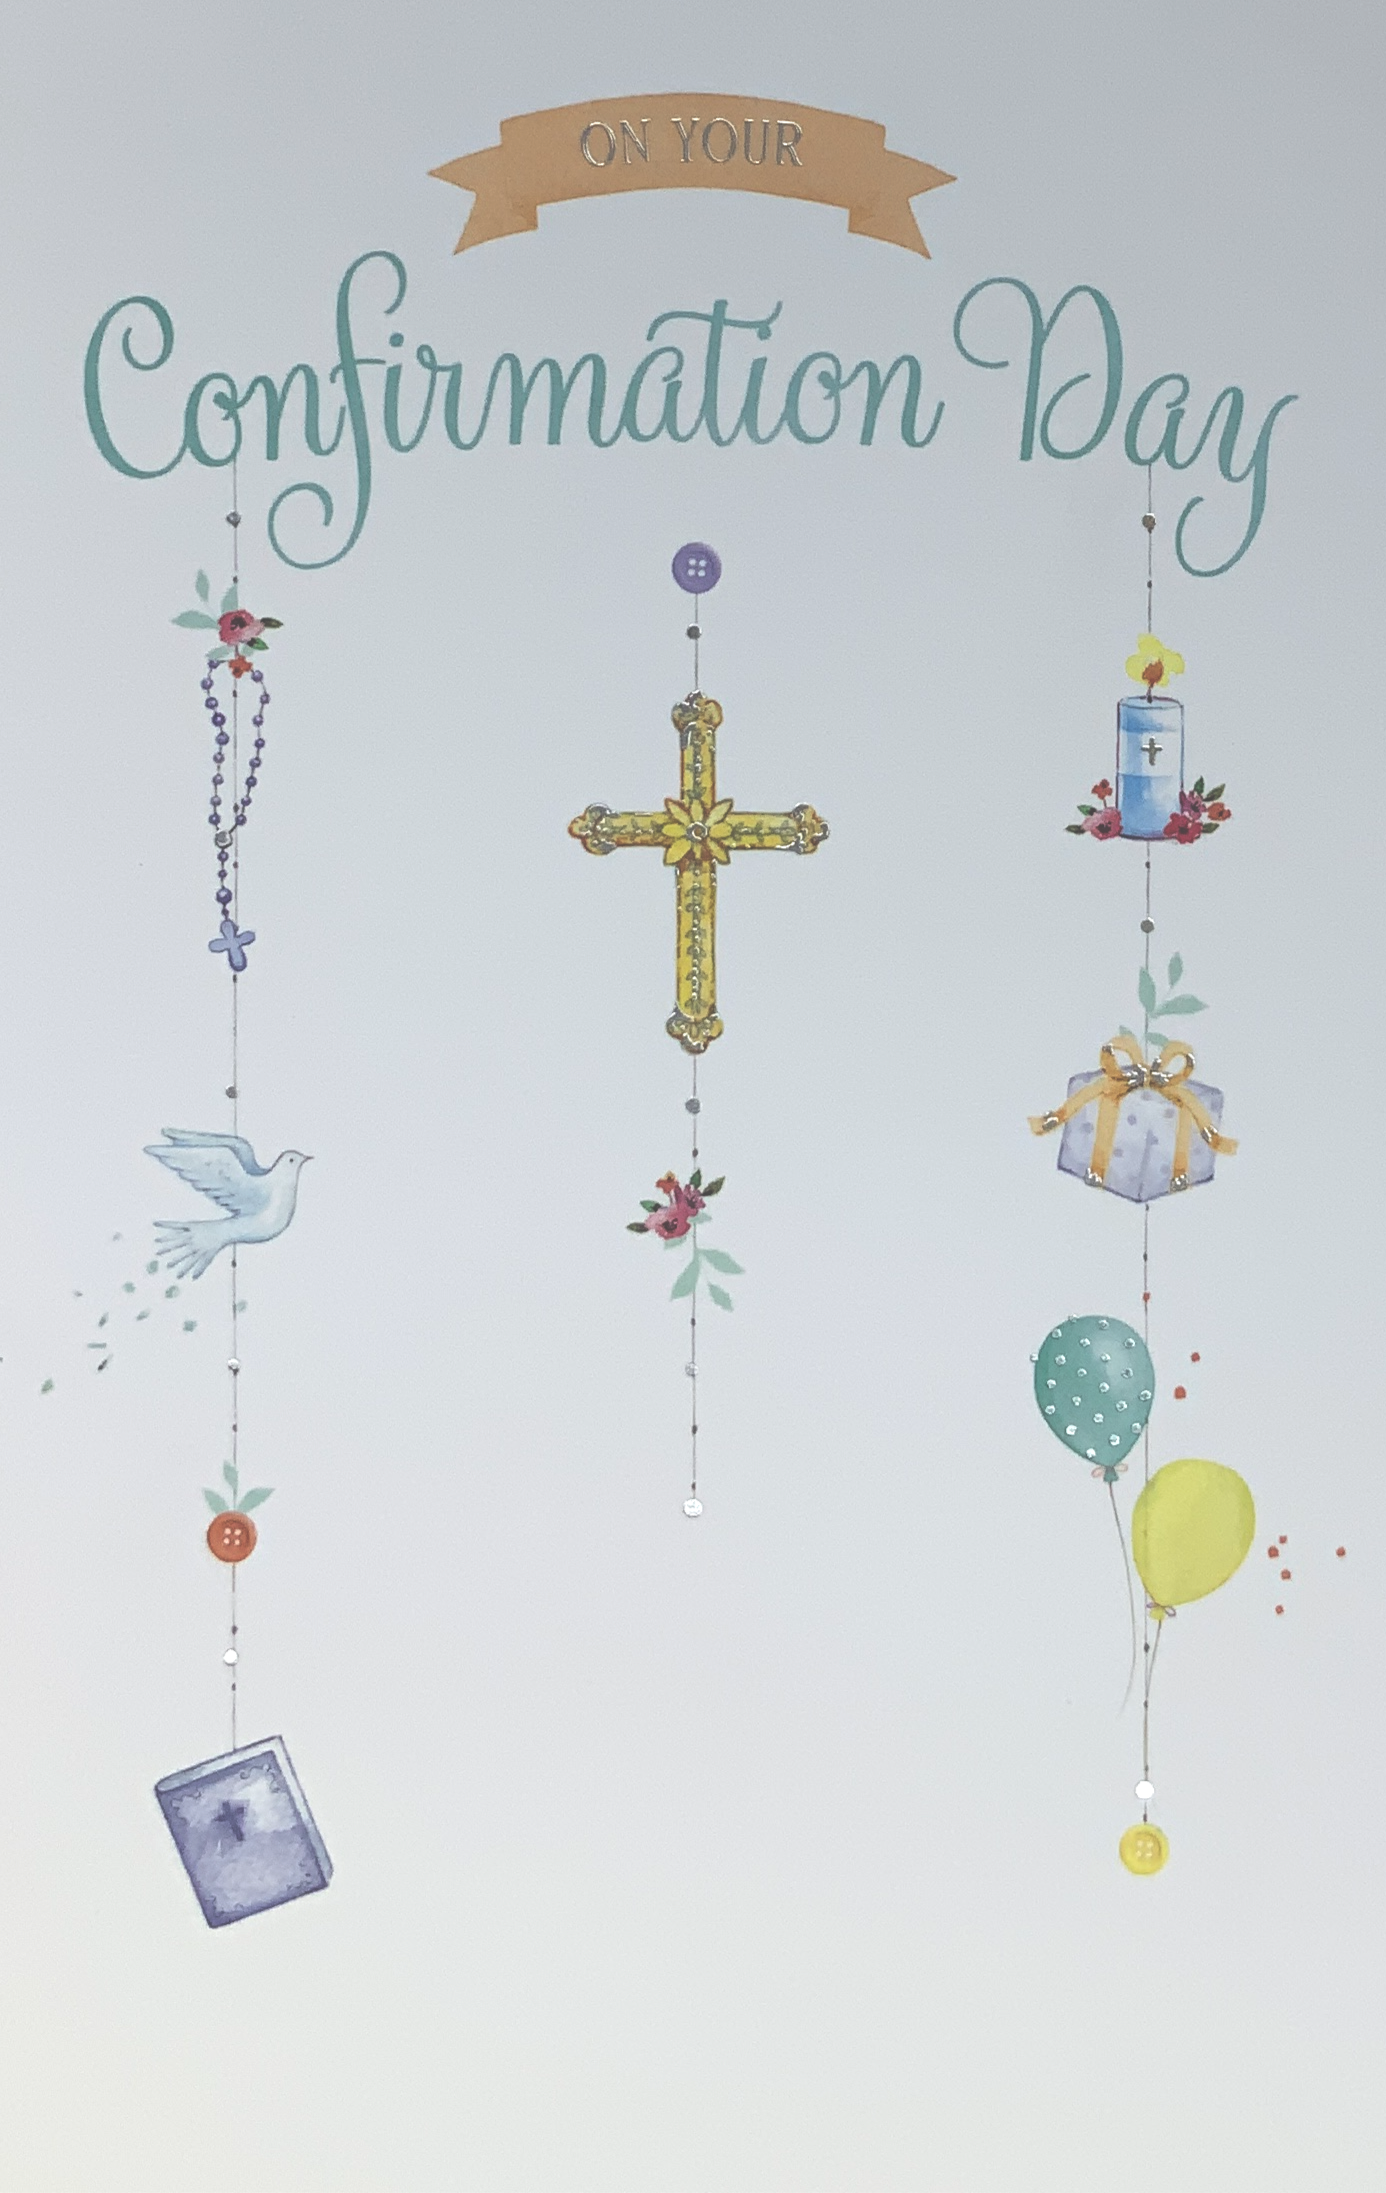 Confirmation Card - On Your Confirmation Day